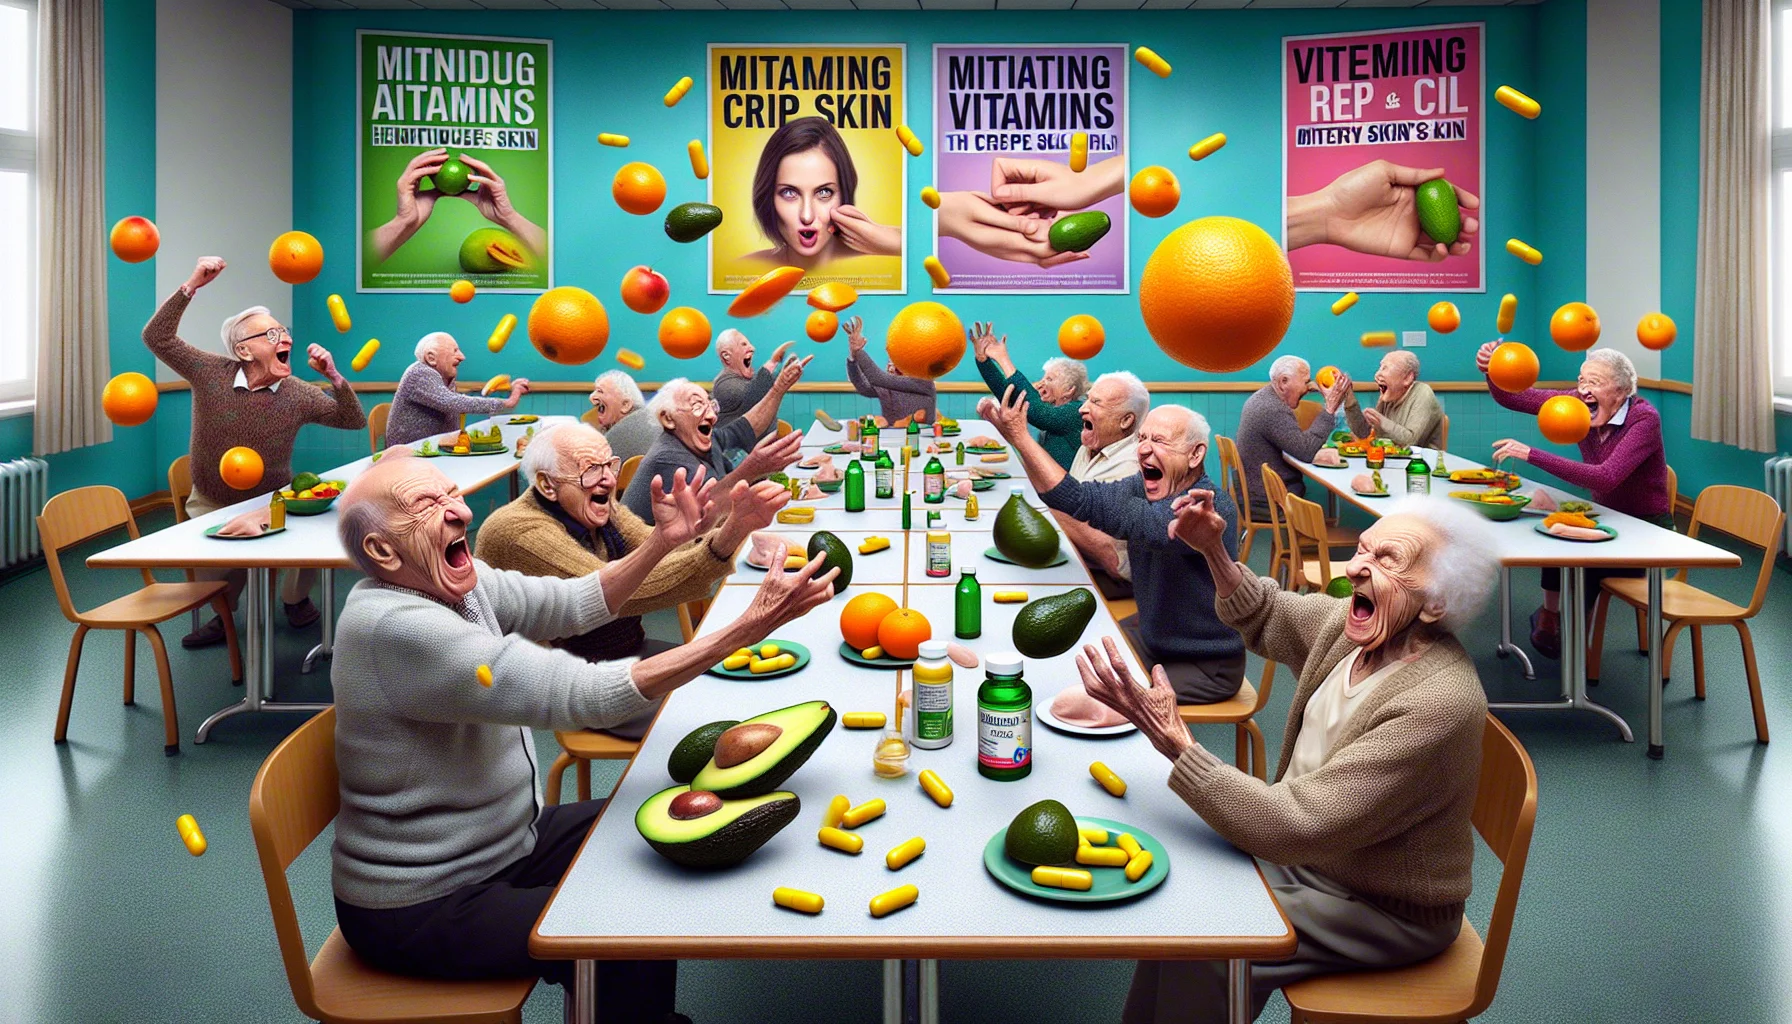 An amusing image, aiming for realism, showcasing the vital role vitamins play in mitigating crepey skin. Imagine a lively scene in a lively nursing home dining hall, where a group of elderly people are engaged in a light-hearted food fight. They're laughing as they playfully toss ripe avocados, plump oranges and capsules of fish oil on each table. Each of these food items symbolizes the various vitamins that are beneficial for the skin such as Vitamin E, C and Omega-3 fatty acids. The walls of the dining hall are adorned with brightly colored posters that promote the dietary importance of these items for healthy skin.